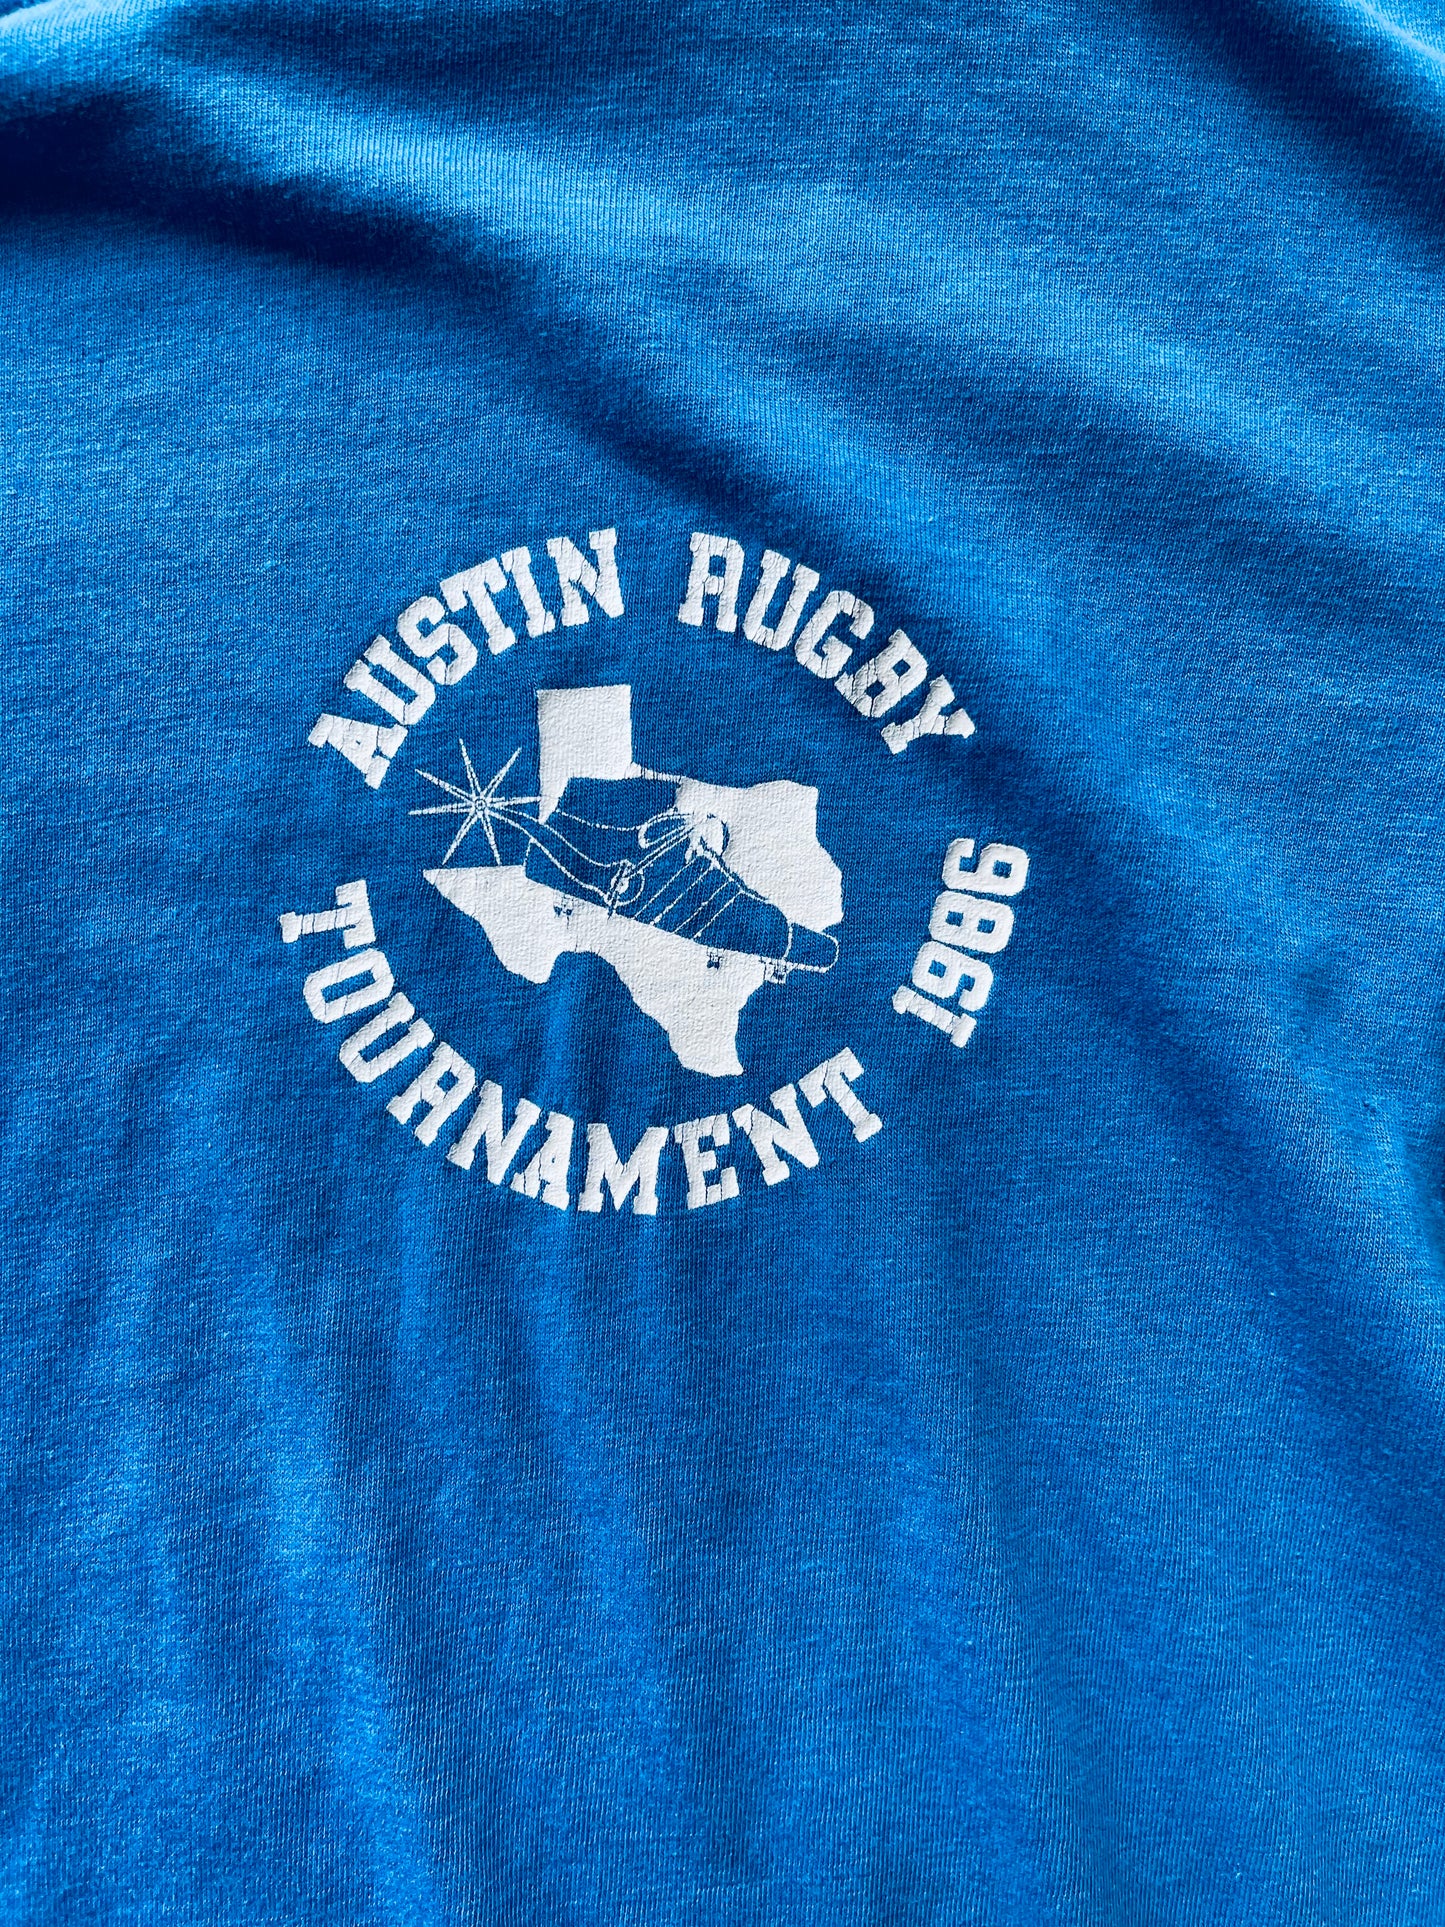 1986 Austin Rugby Tournament Tee | X-Large